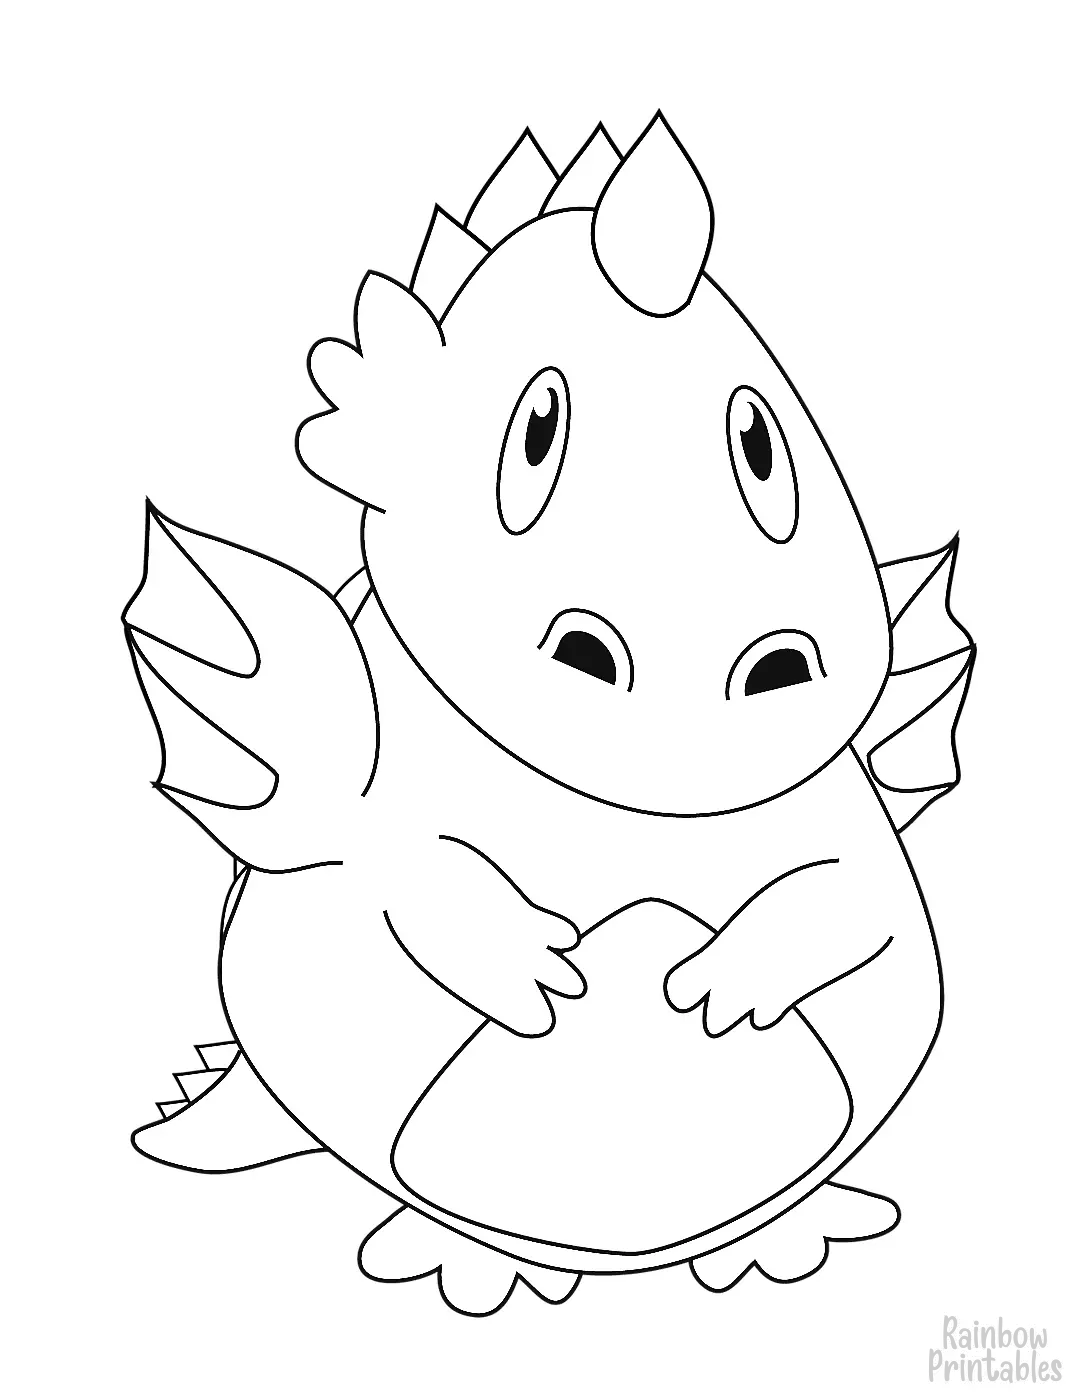 SIMPLE-EASY-line-drawings-CARTOON-DRAGON-coloring-page-for-kids